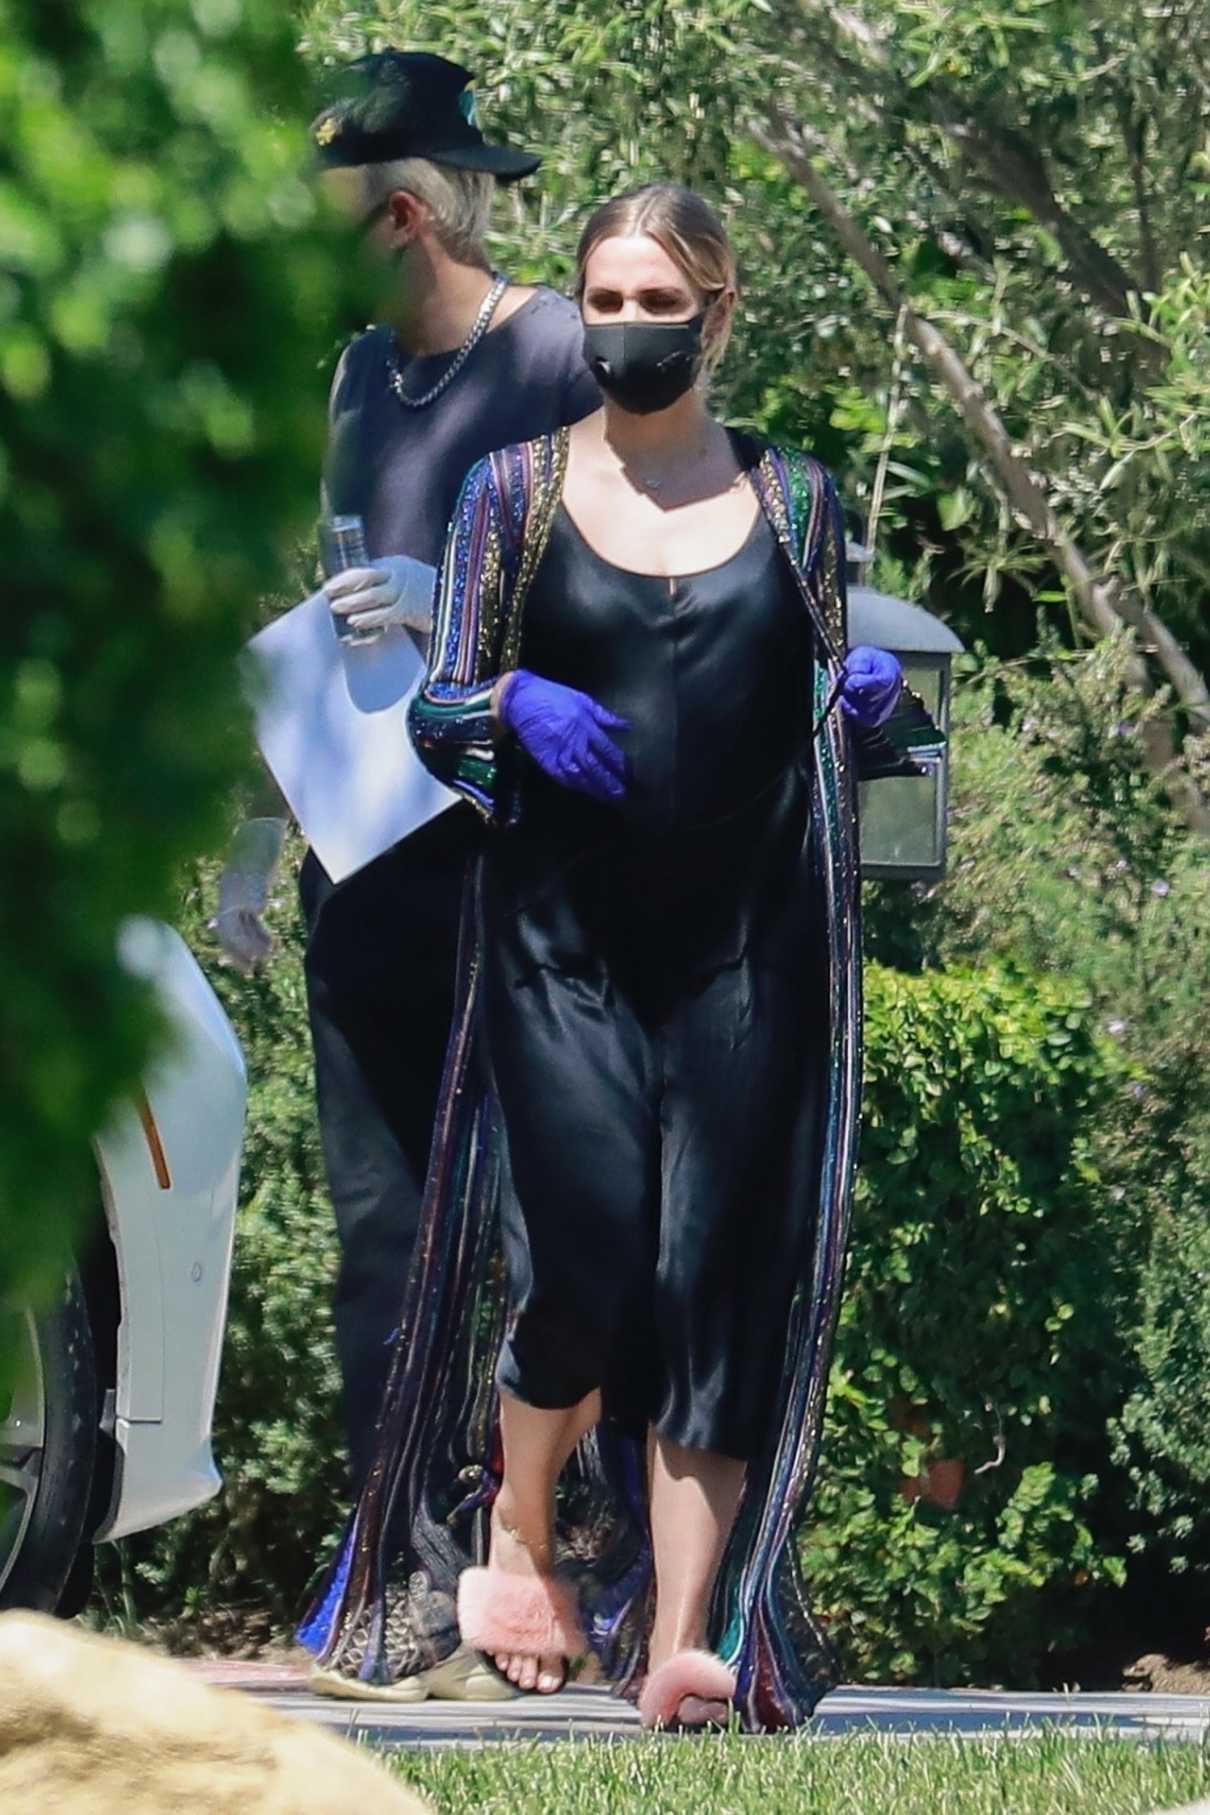 Ashlee Simpson in a Black Protective Mask